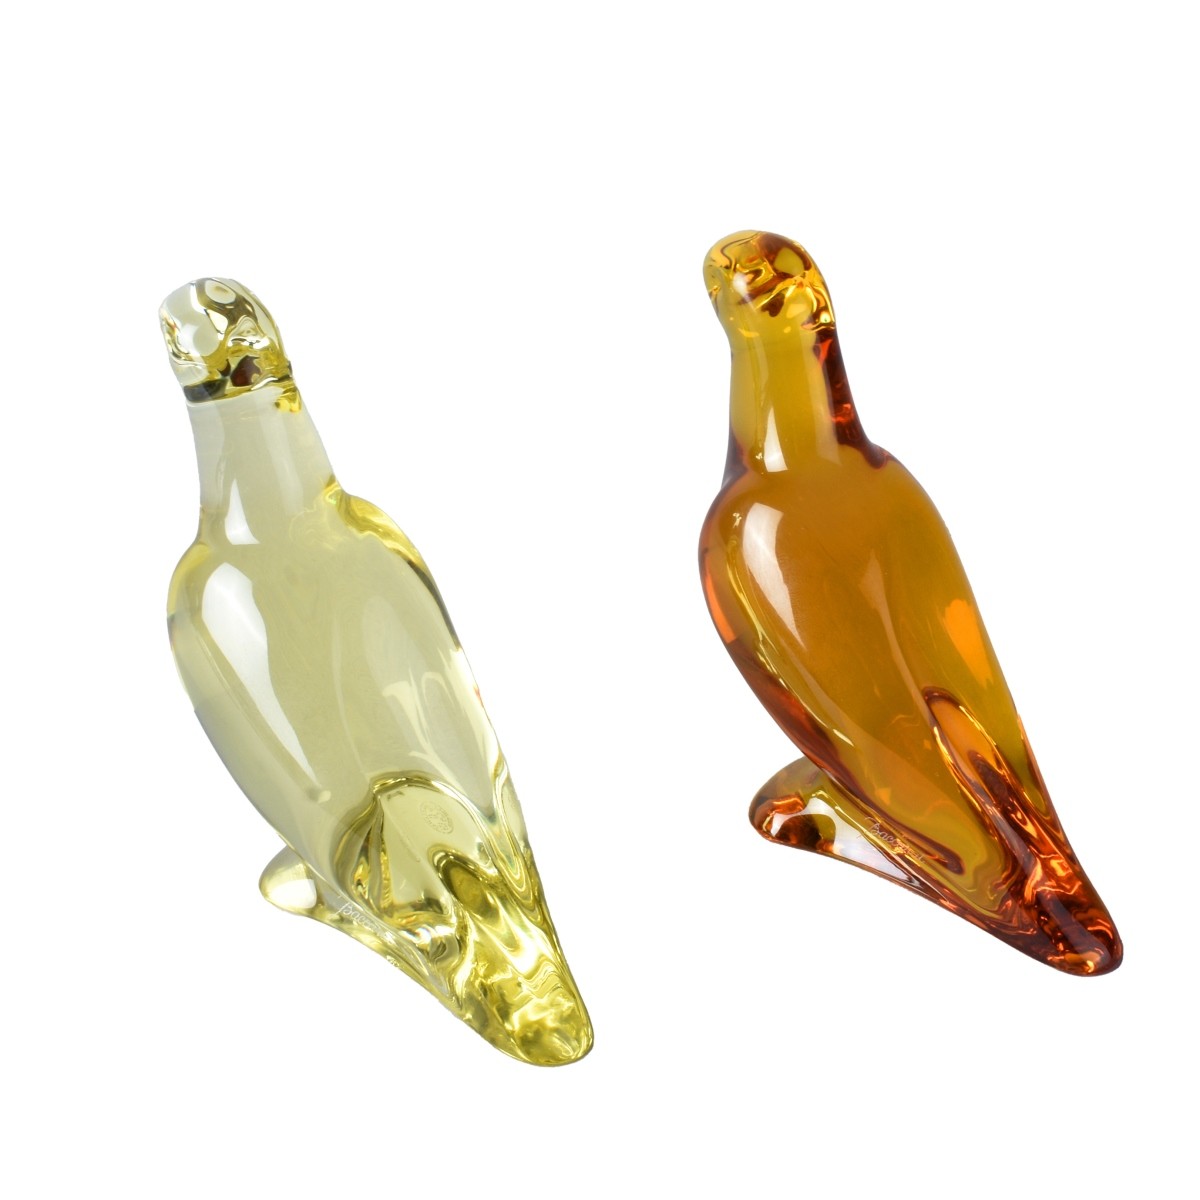 Two Baccarat Crystal Figurines